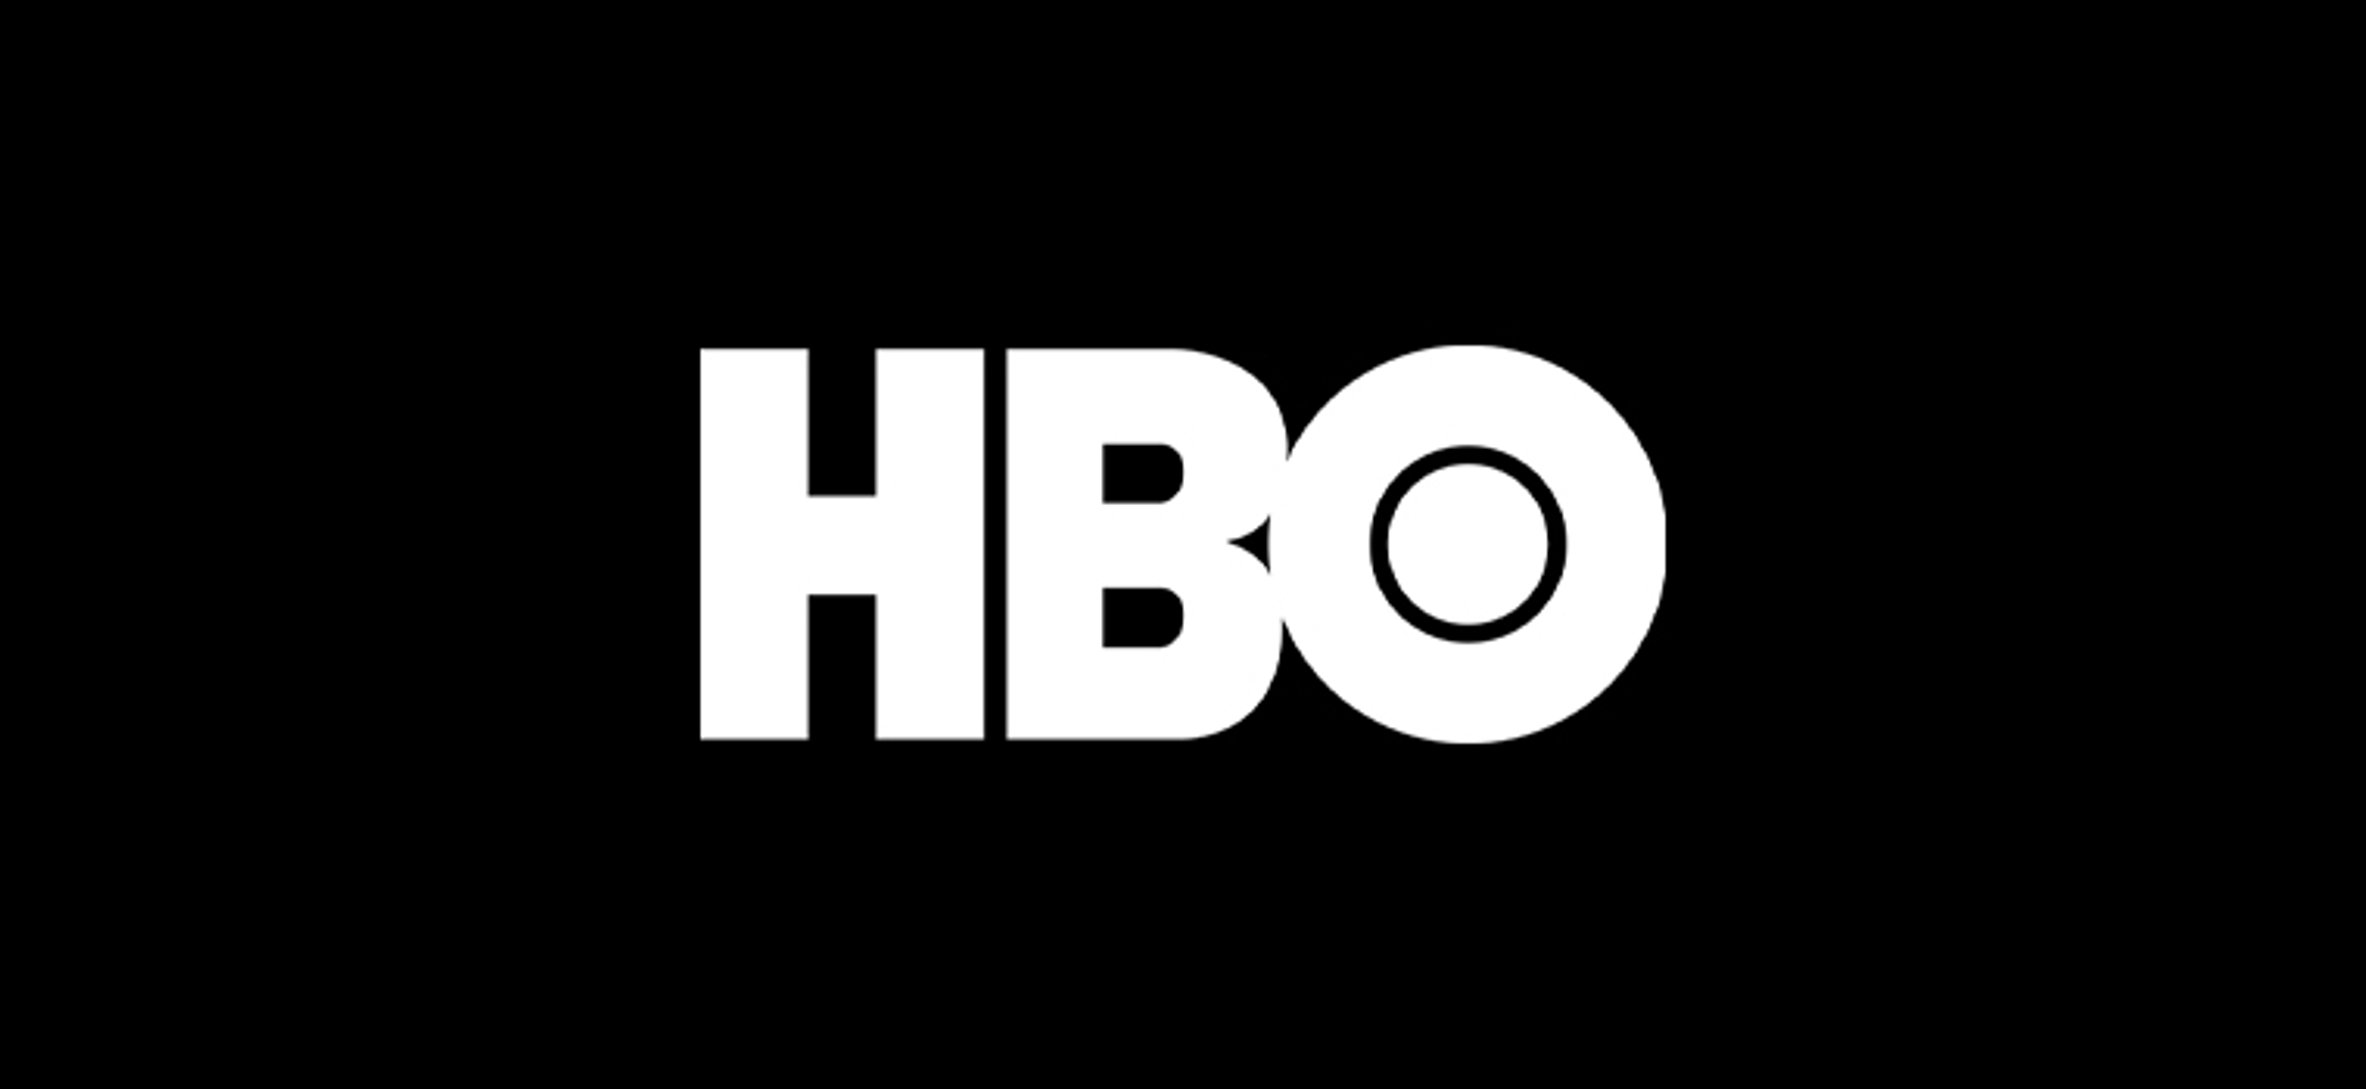 New HBO Series by Jordan Peele & J.J. Abrams’ Lovecraft Country is Casting!